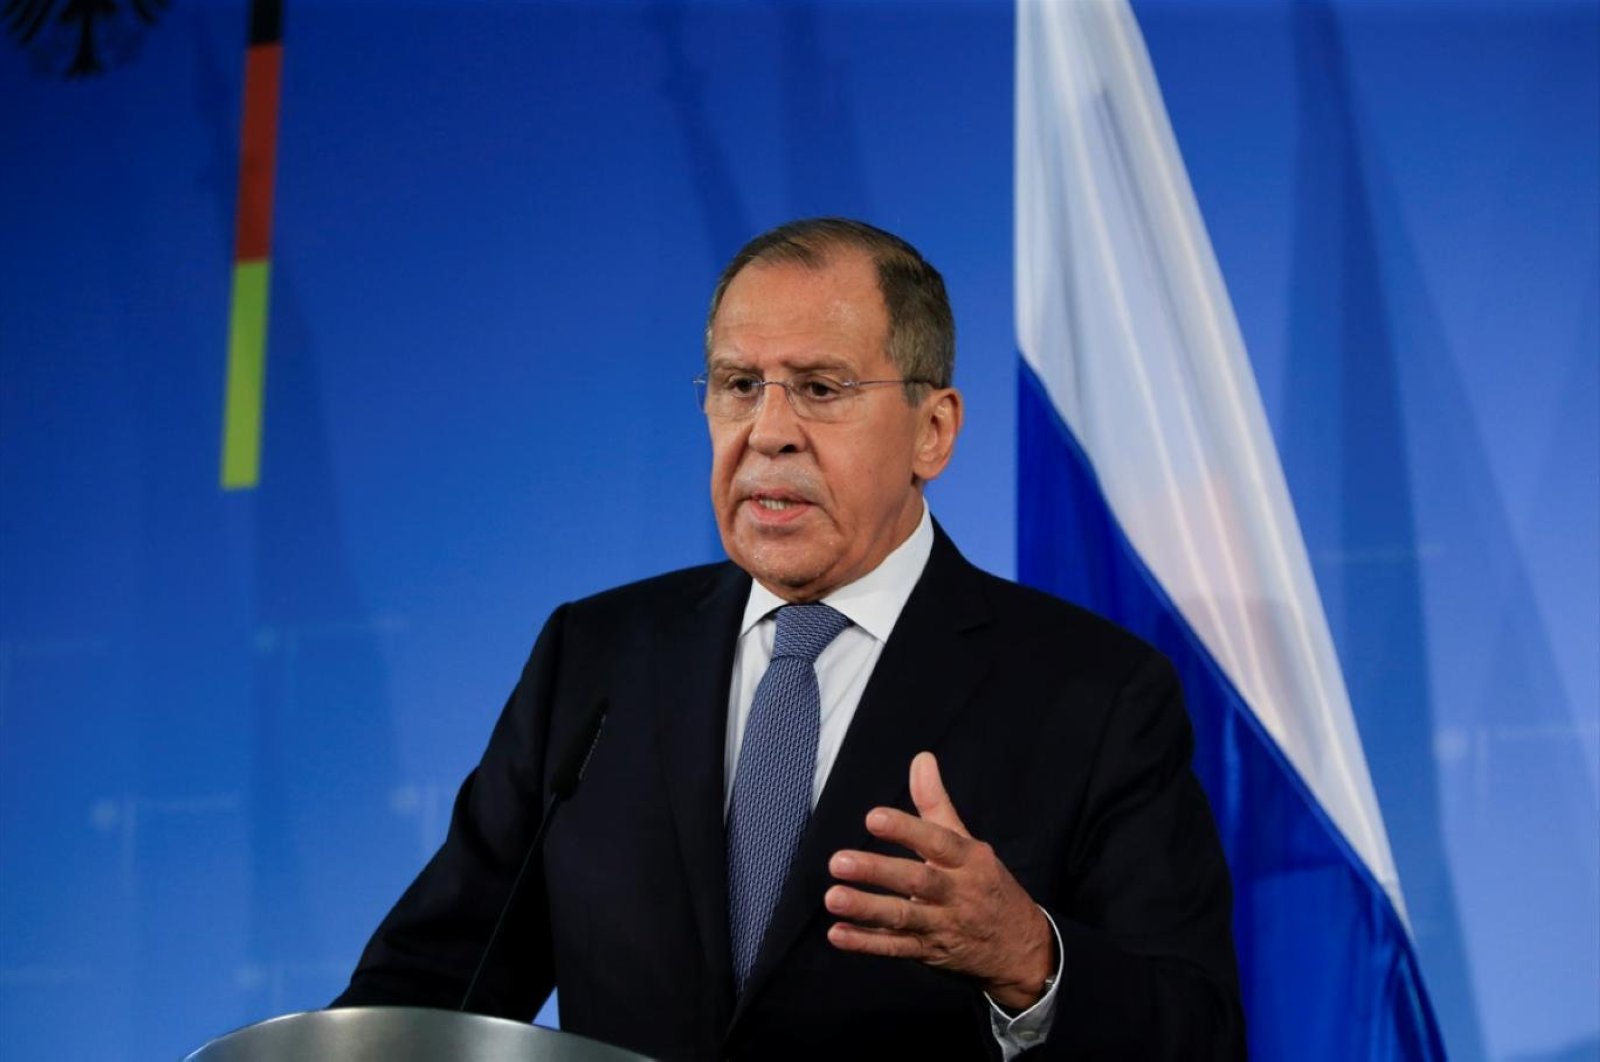 Russian Foreign Minister Sergei Lavrov at a press conference in Germany, Oct. 3, 2019. (Sabah File Photo)